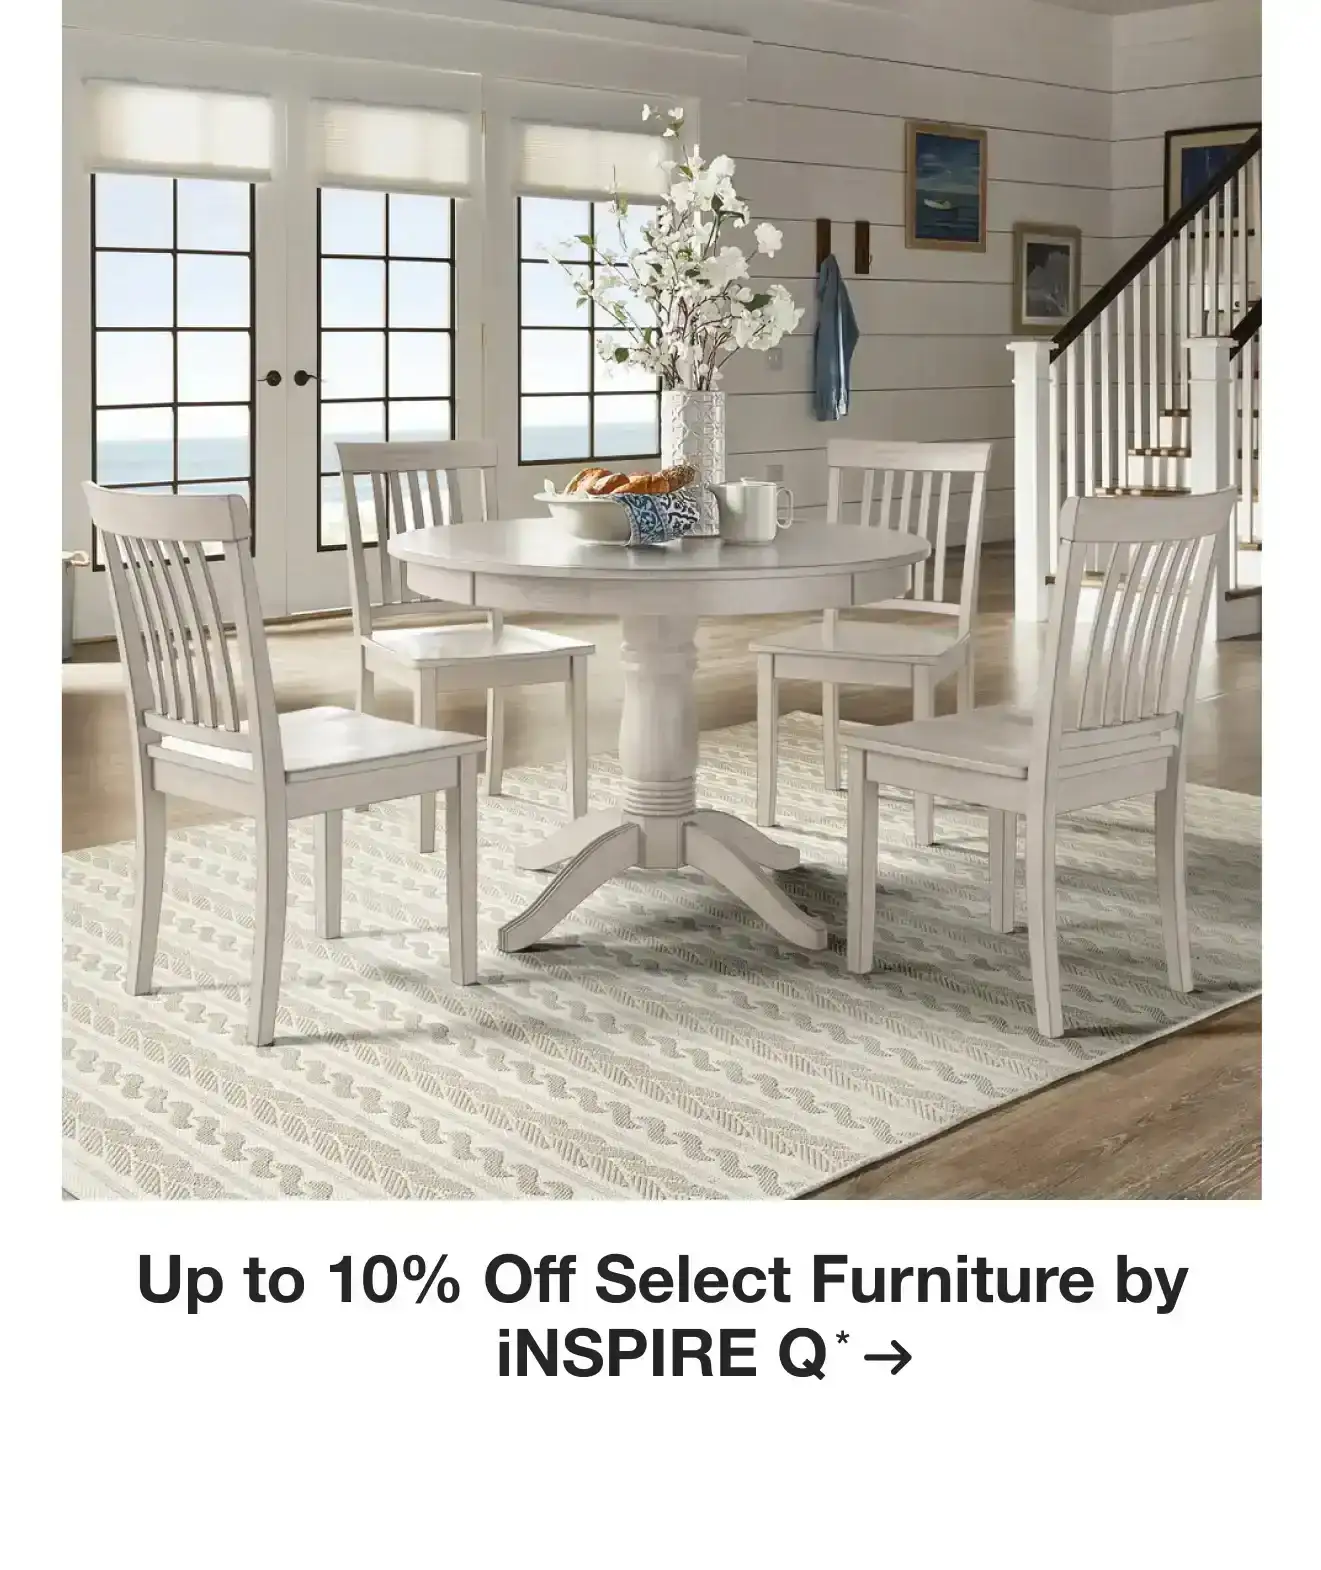 Up to 10% Off Select Furniture by iNSPIRE Q*